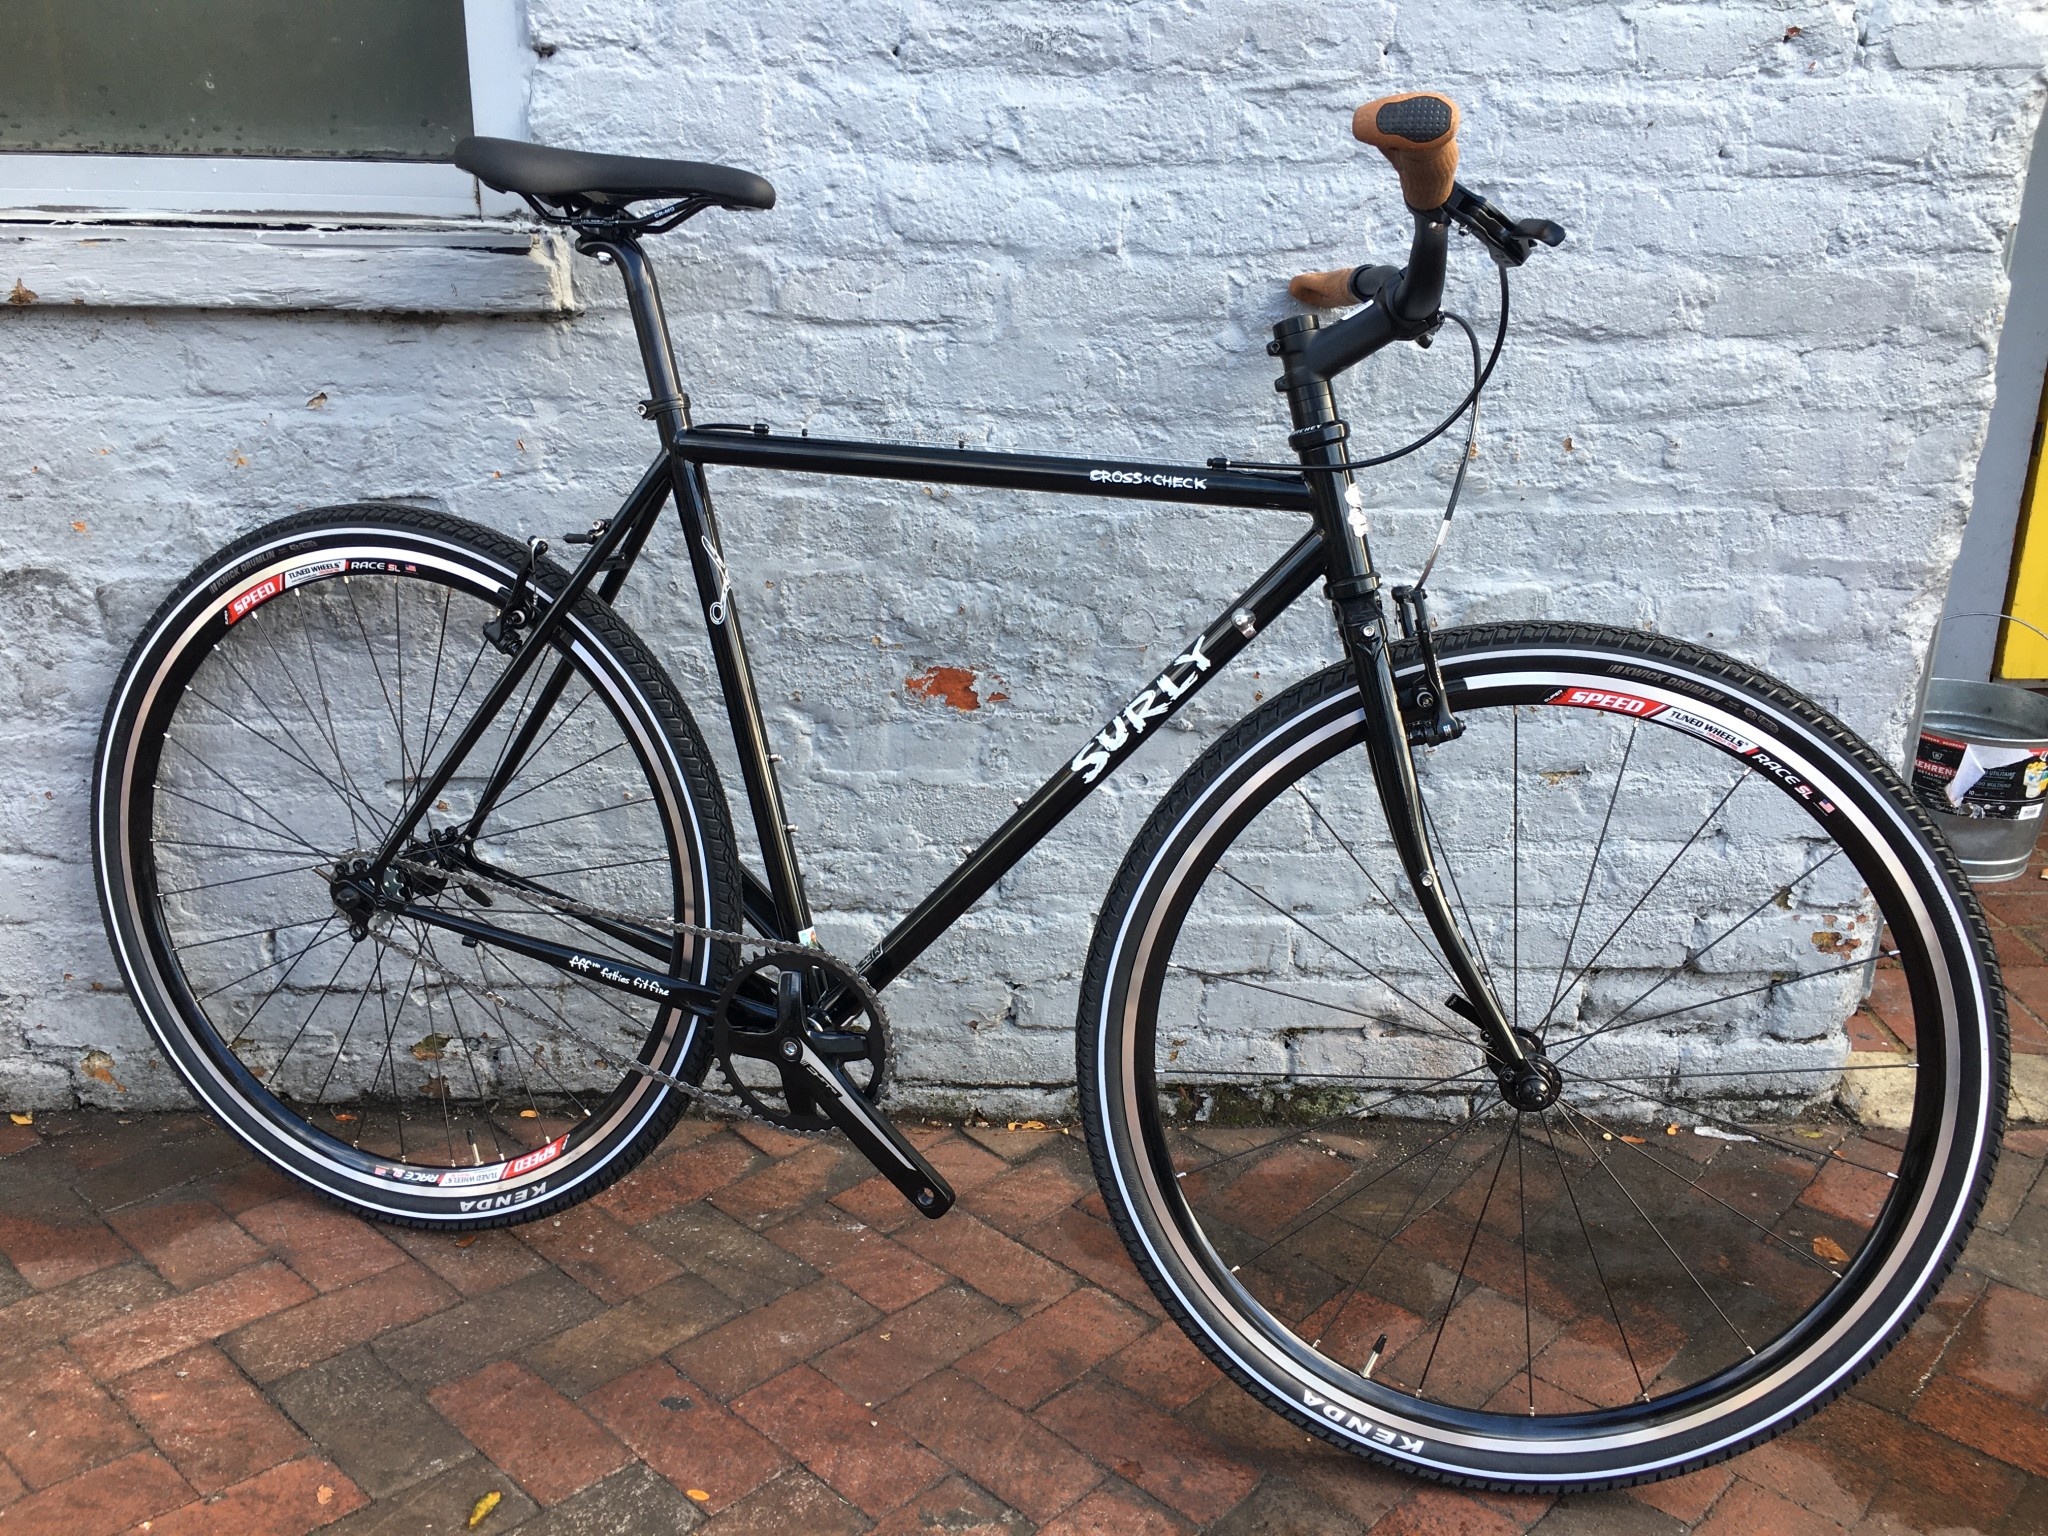 Another Surly Cross Check build - A Bike Build